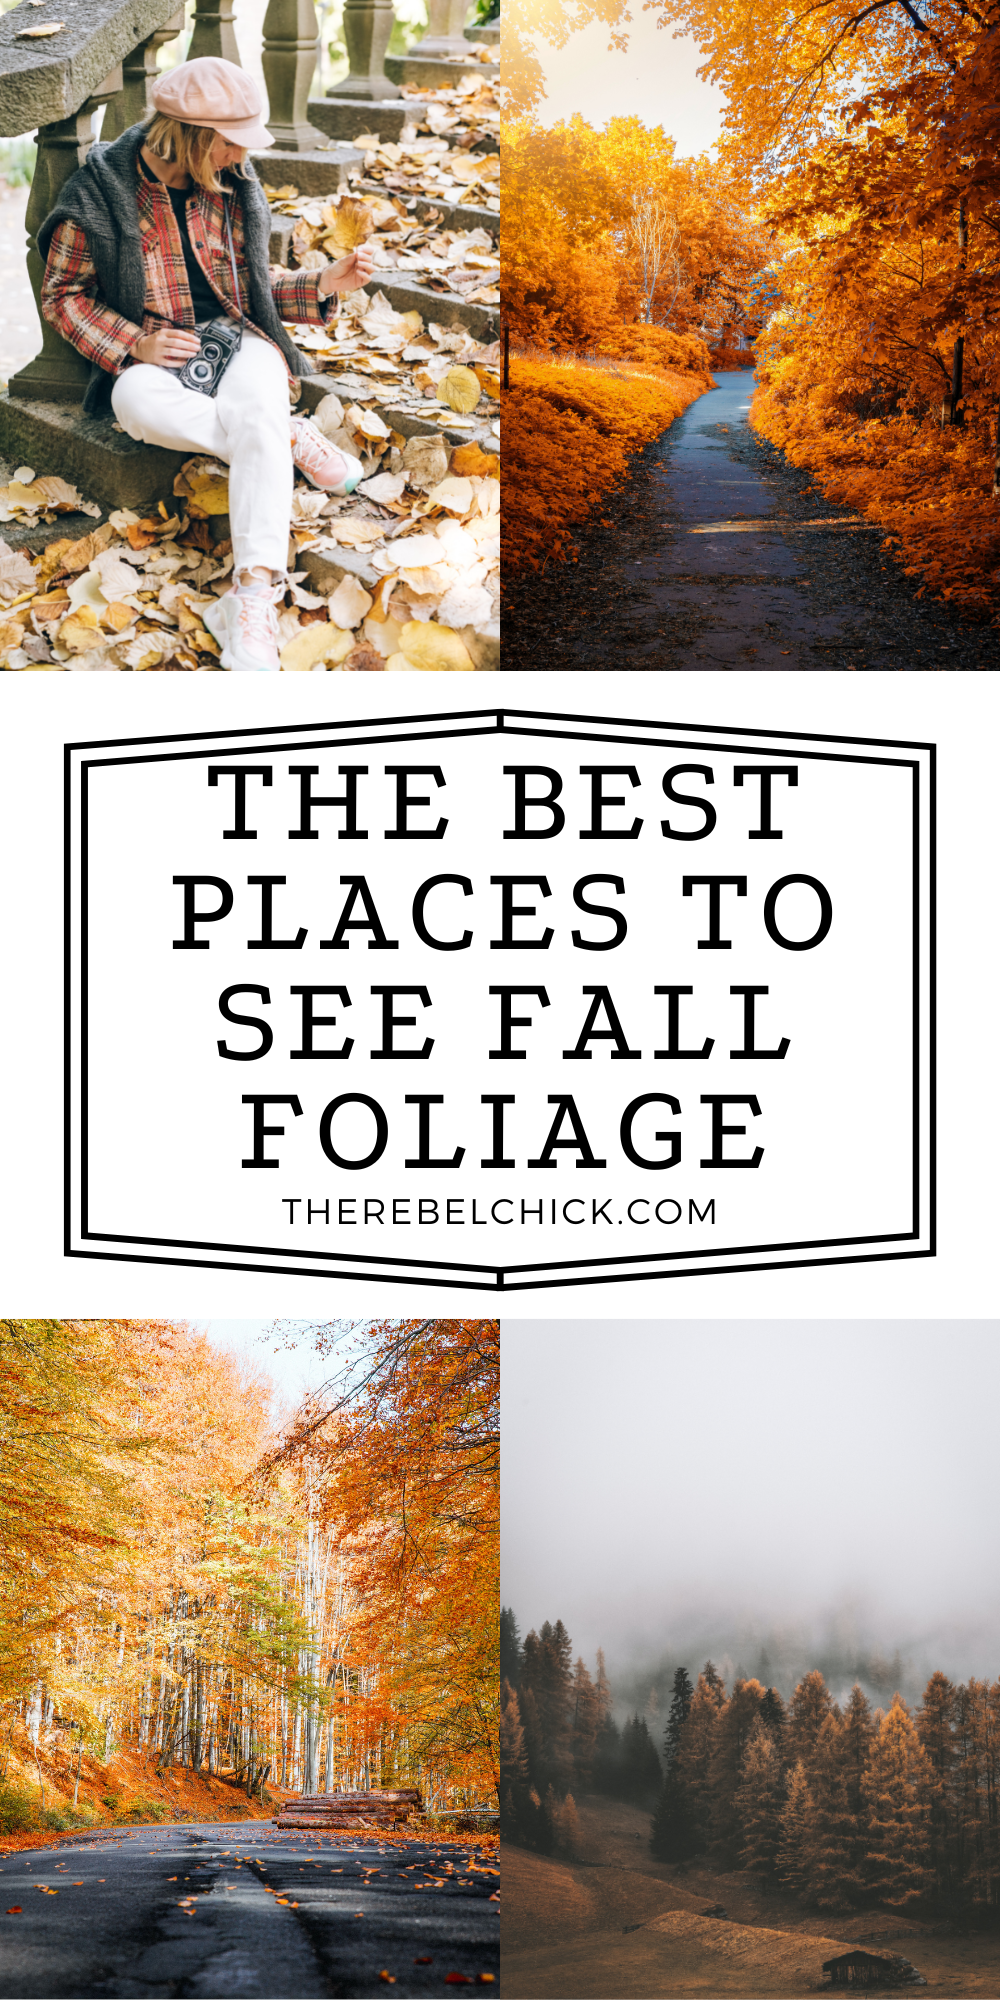 Where are The Best Places To See Fall Foliage?